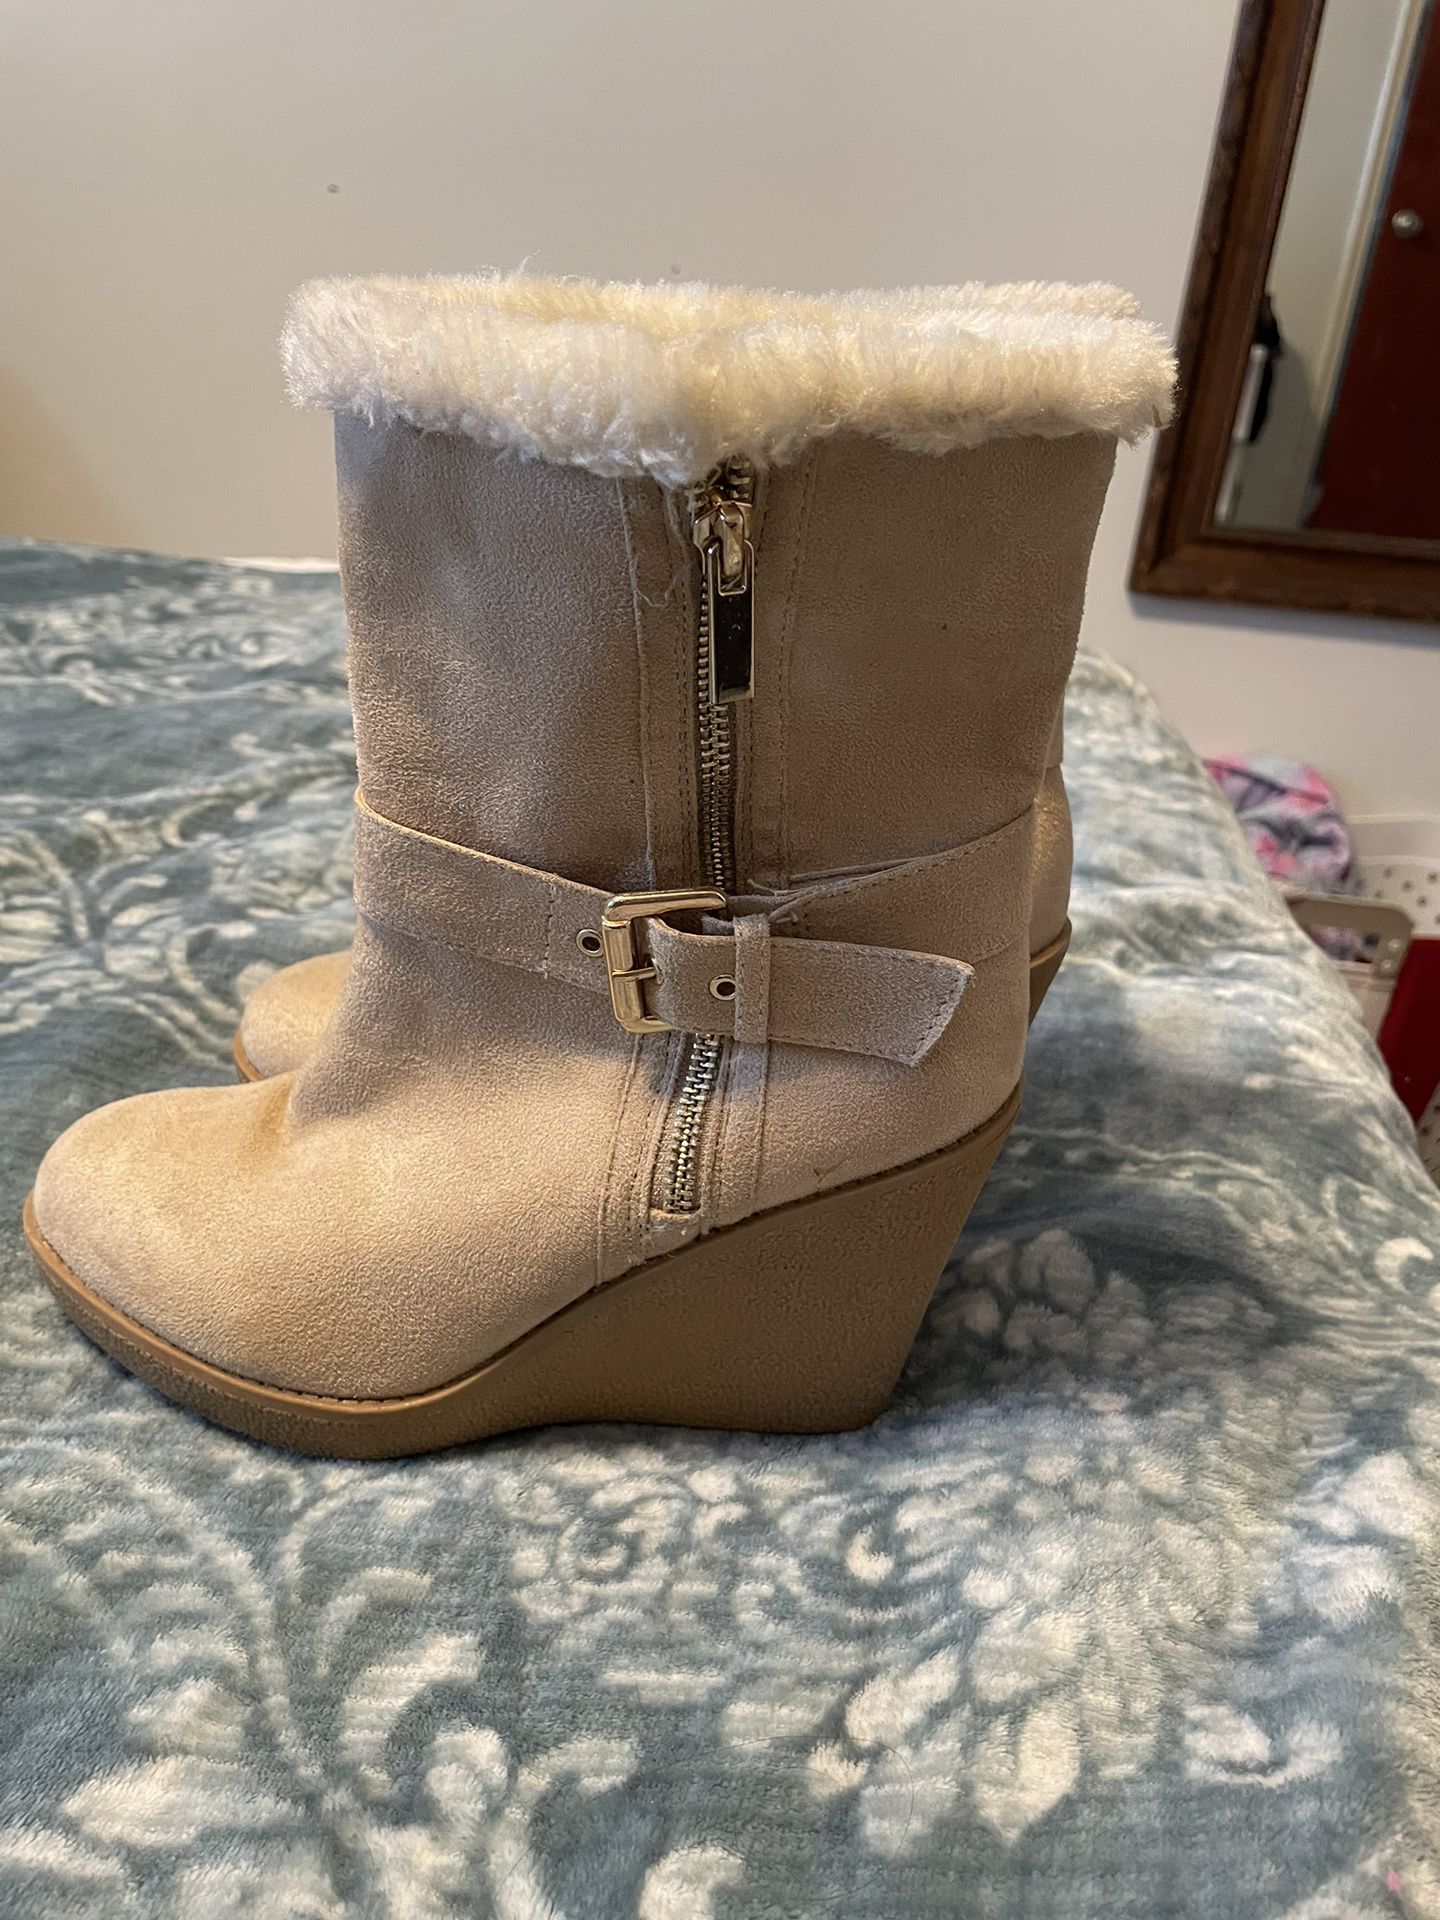 Almost Brand New Ran Wedge Fur Boots